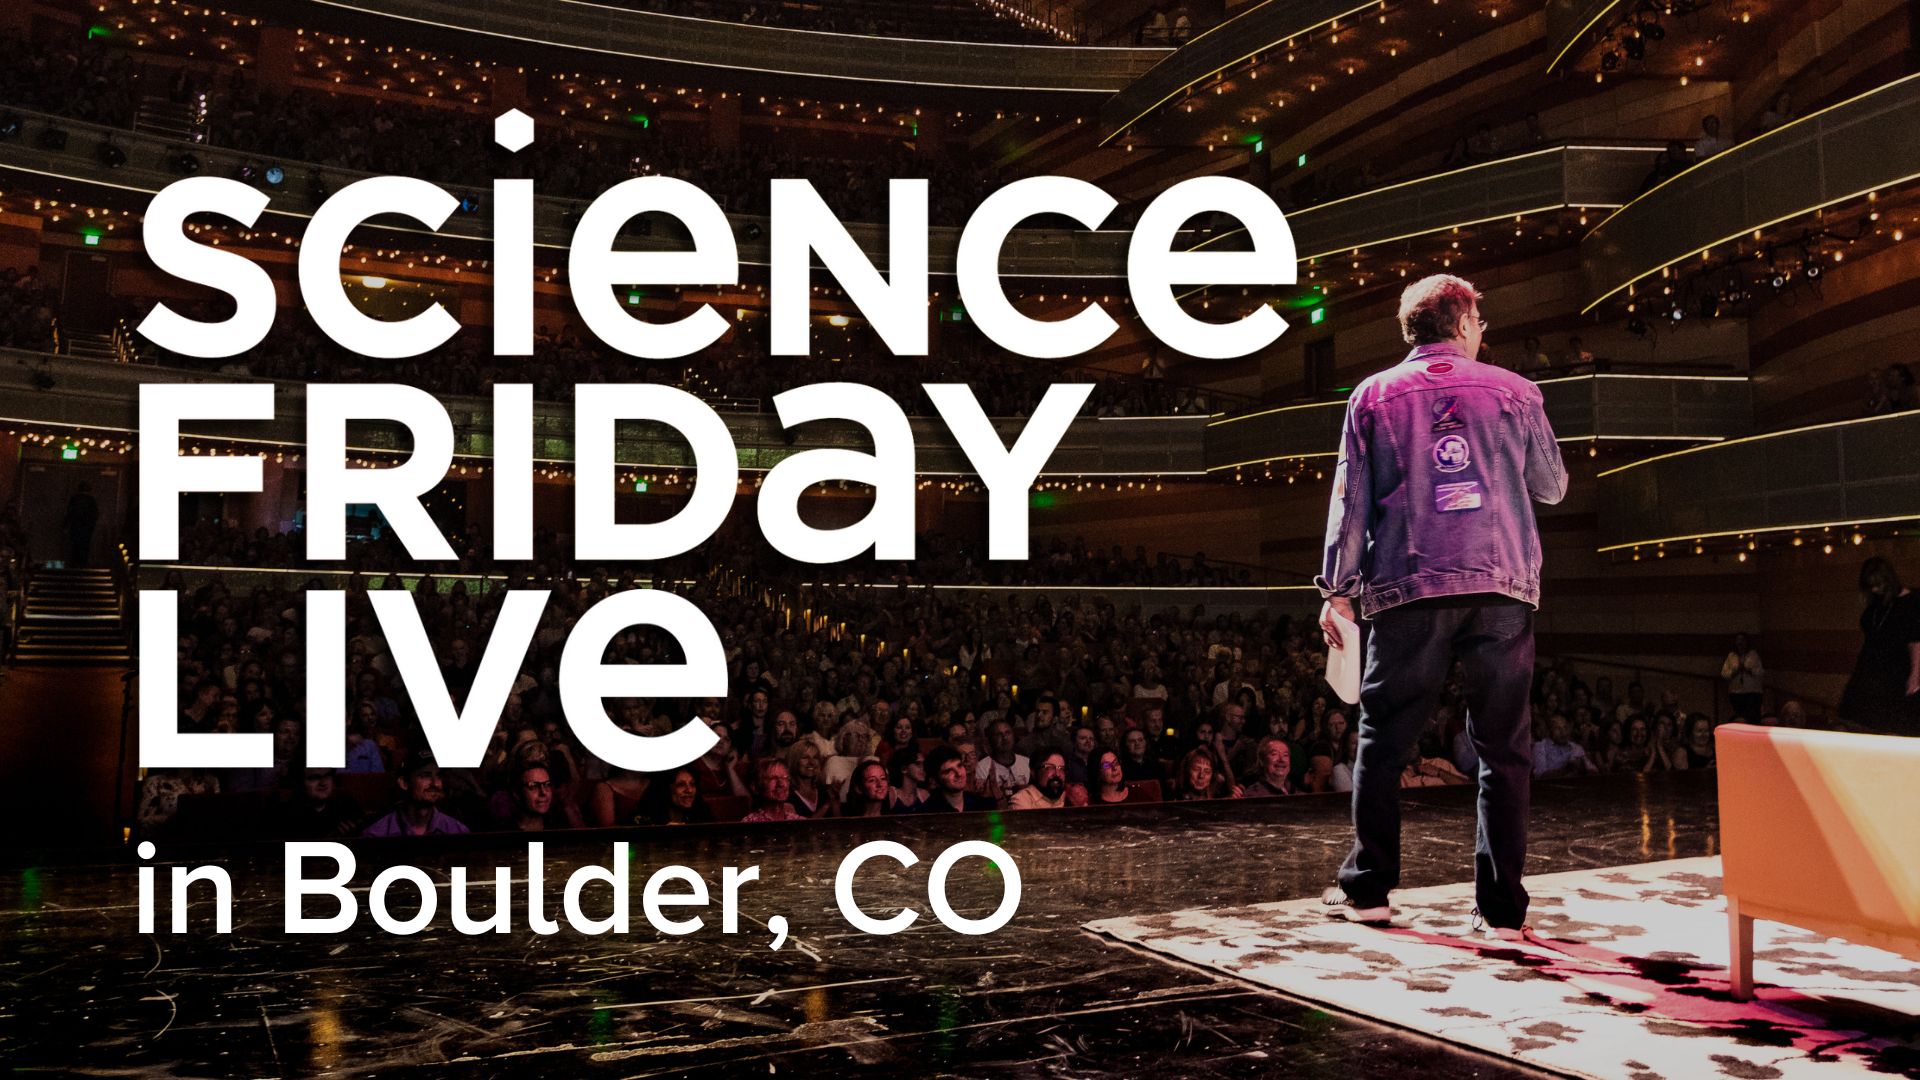 Ira Flatow stands on a stage addressing a live audience in a large auditorium. He faces away from the camera. Text reads "Science Friday Live in Boulder, CO"